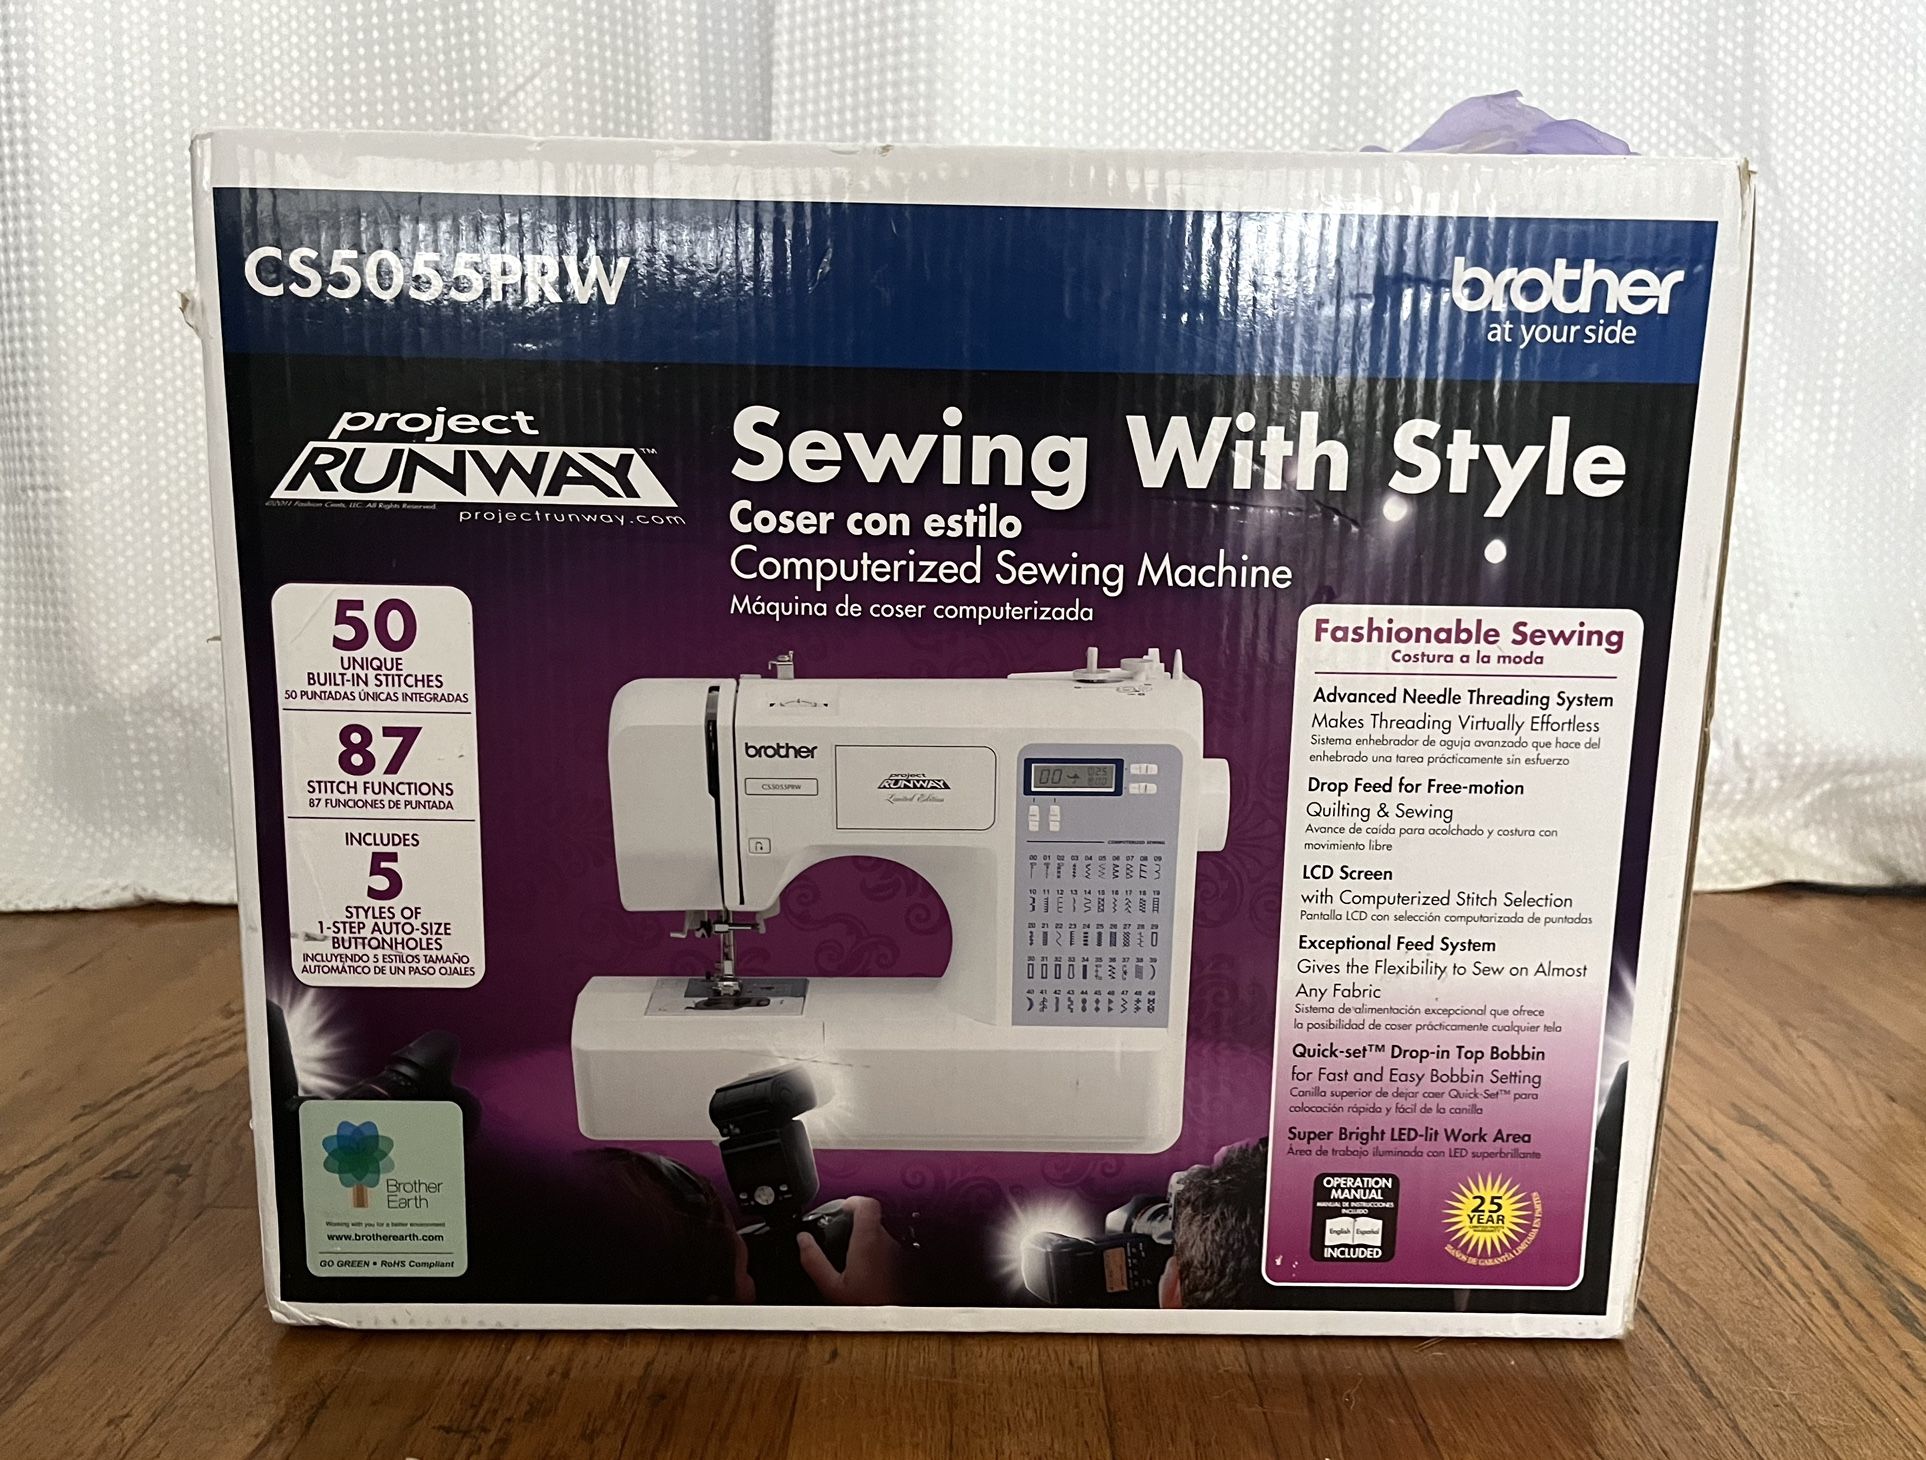 Brother Sewing Machine CS5505PRW. Limited Edition Project Runway Model. 